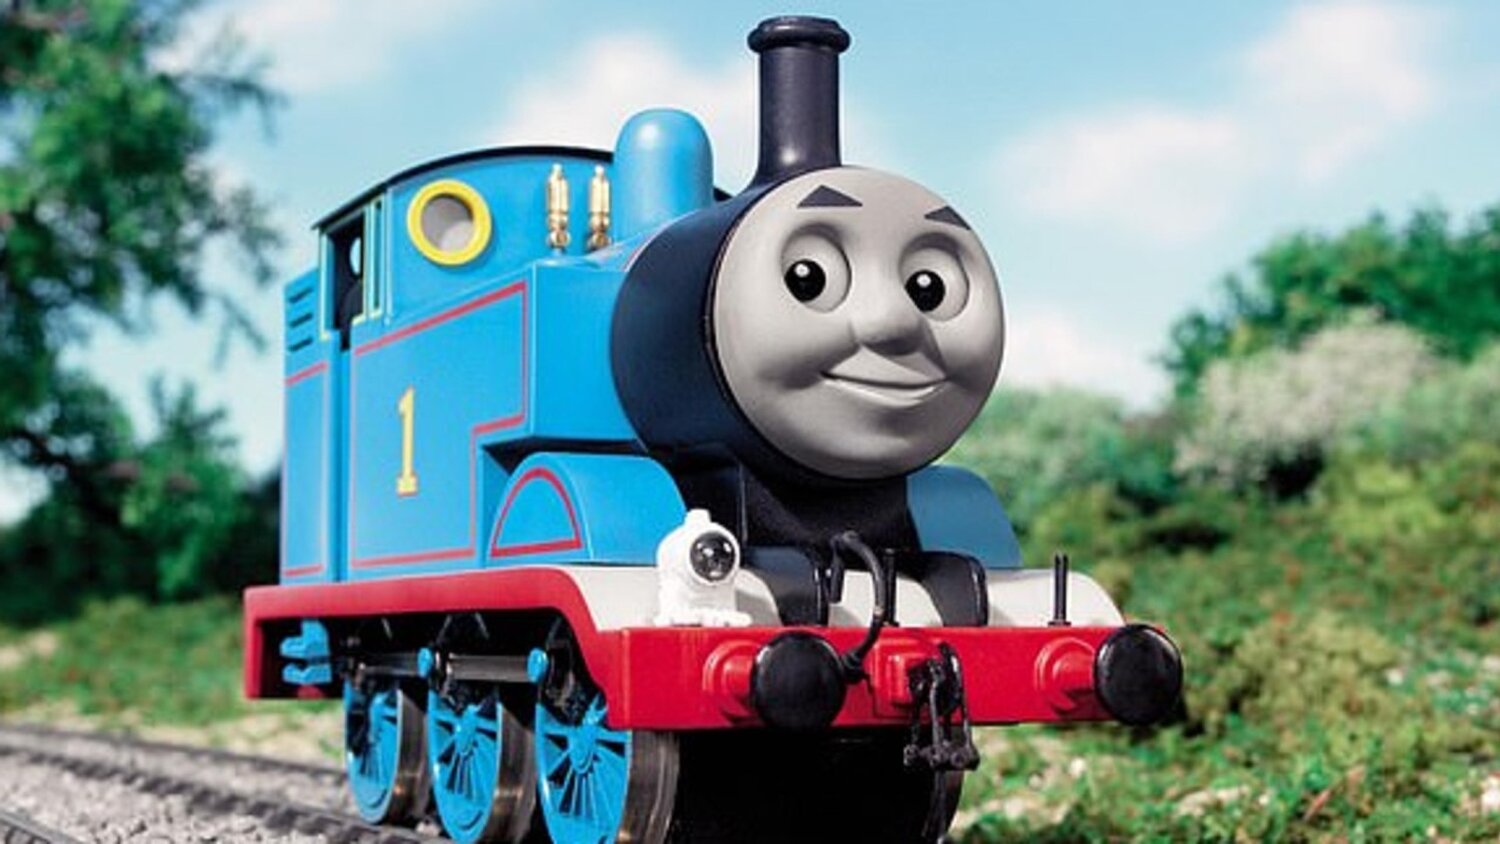 ...of the popular kids franchise Thomas and Friends featuring the classic c...